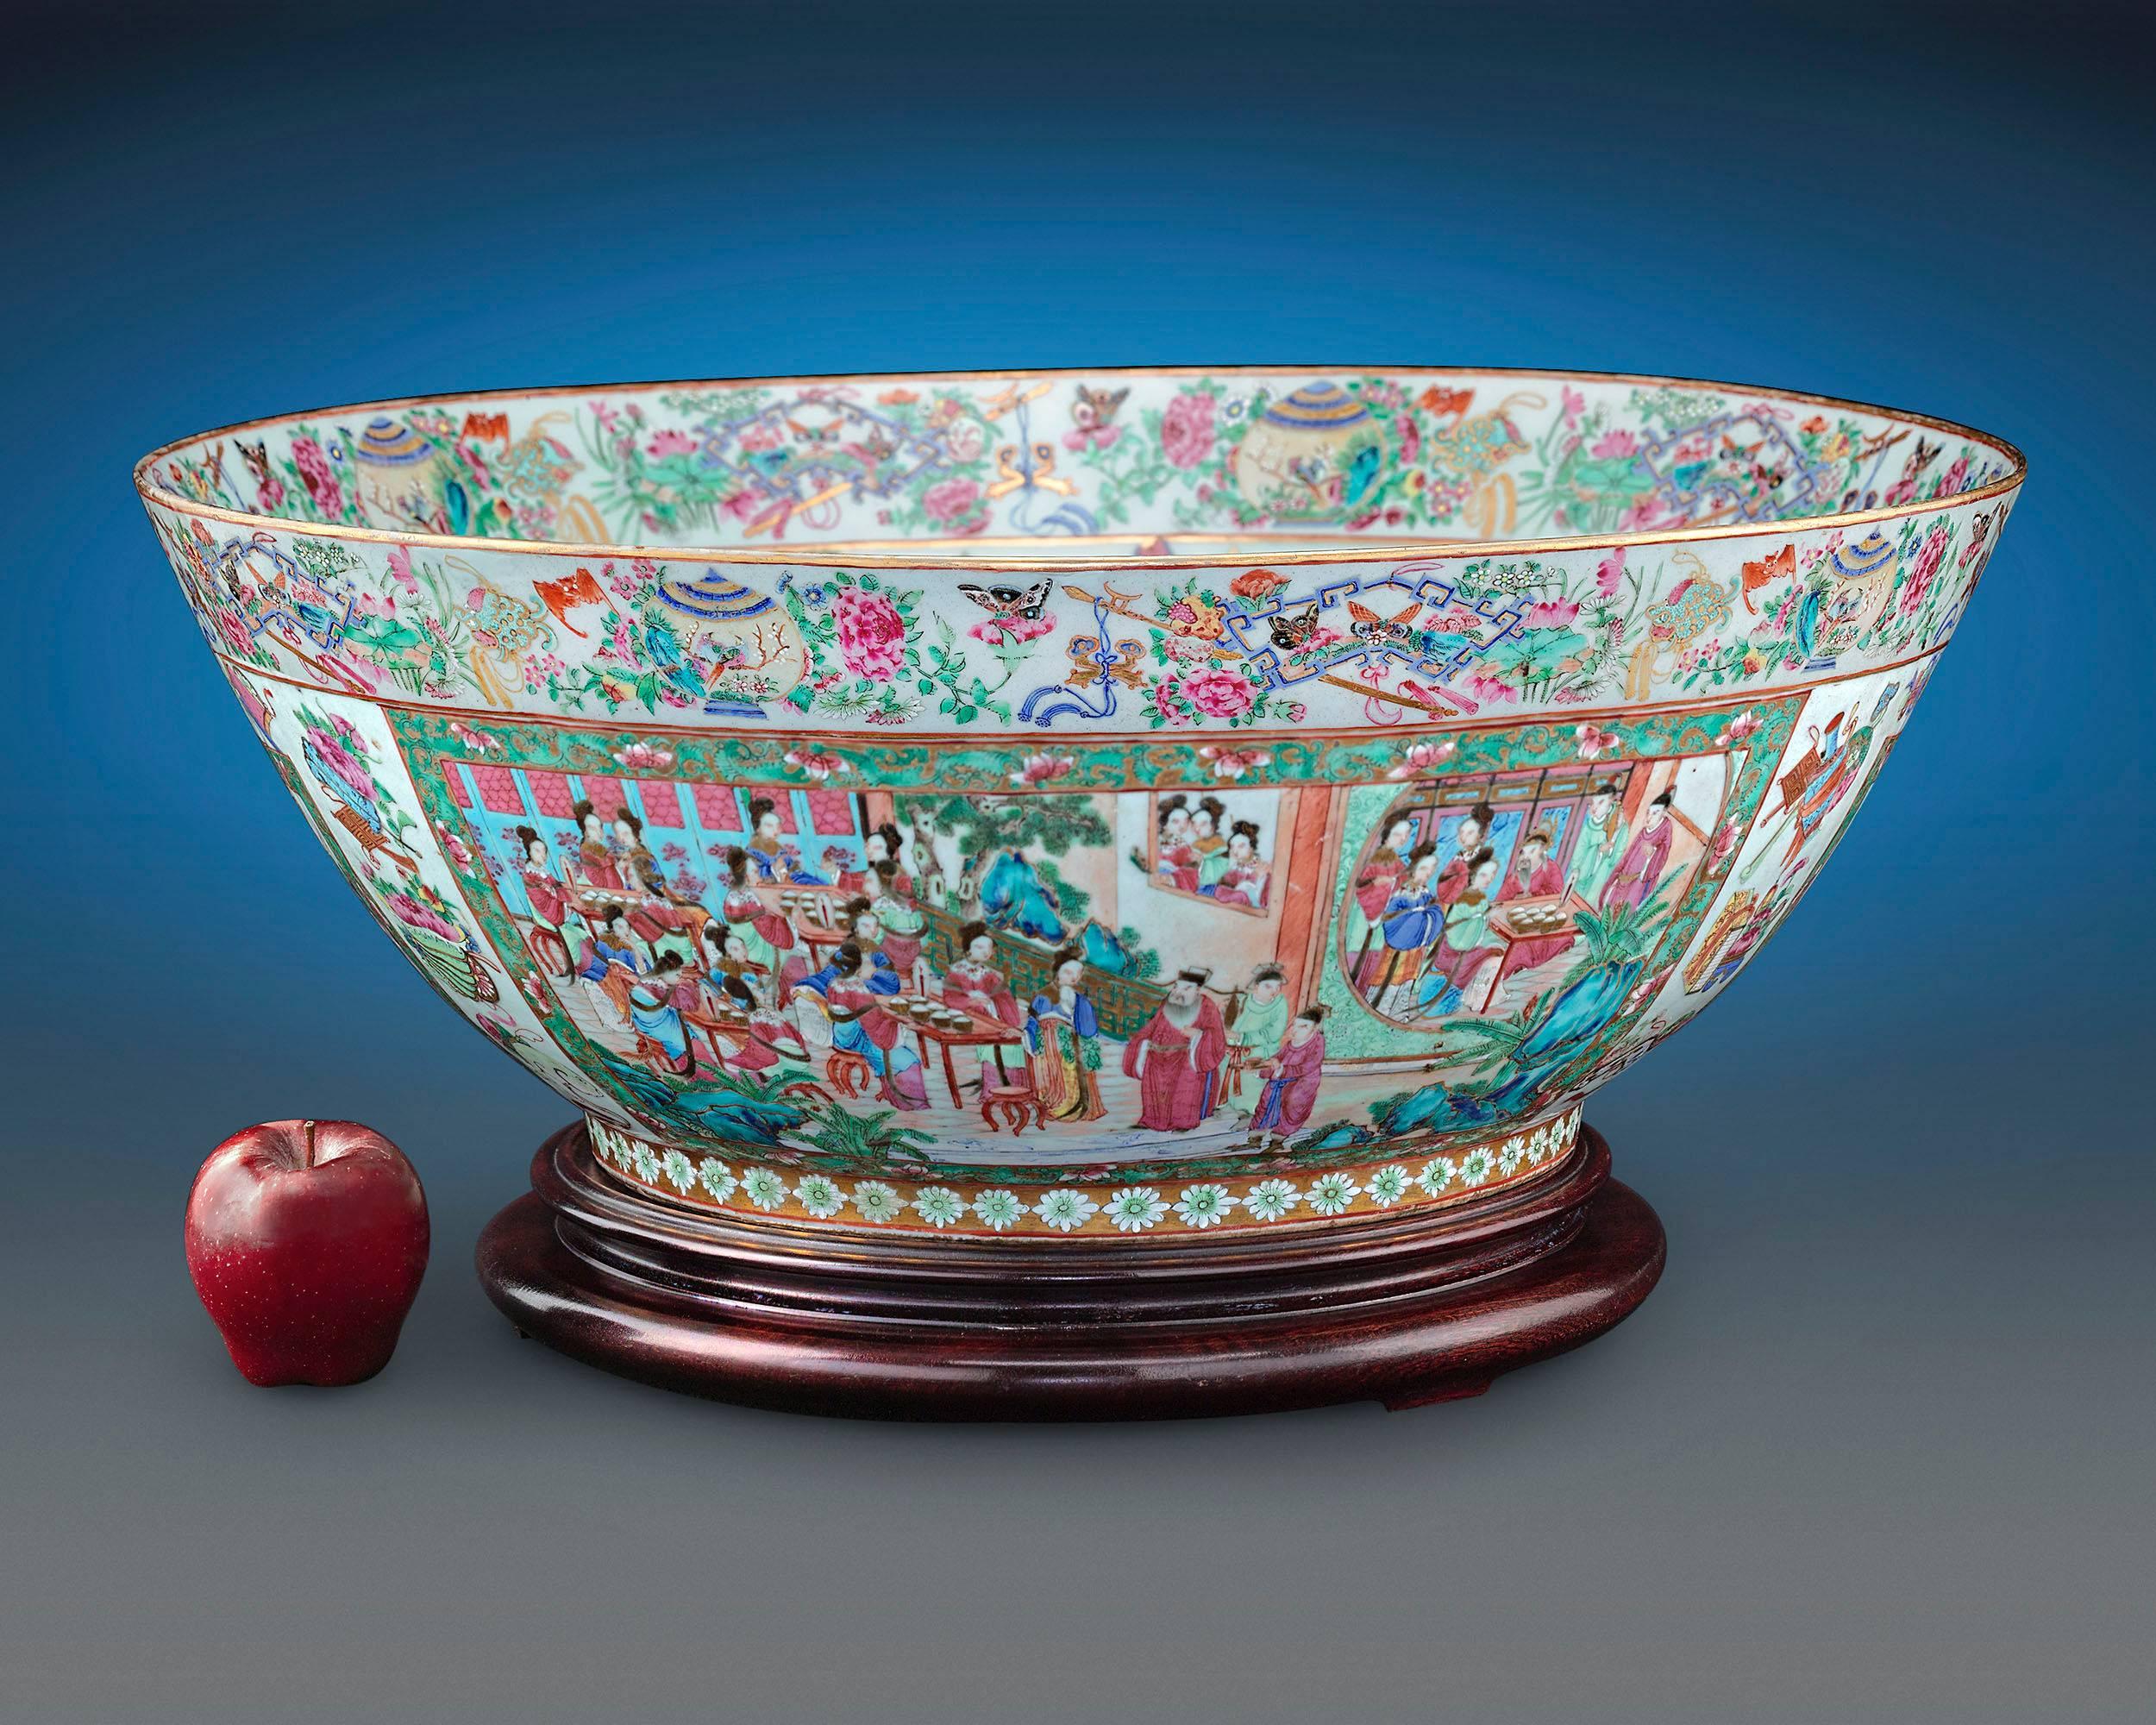 This beautiful and rare Chinese export rose medallion bowl exhibits magnificent artistry and detail. The vessel is adorned with highly detailed hand-painted scenes of courtly life surrounded by an abundance of flowers, birds, butterflies and fruit.